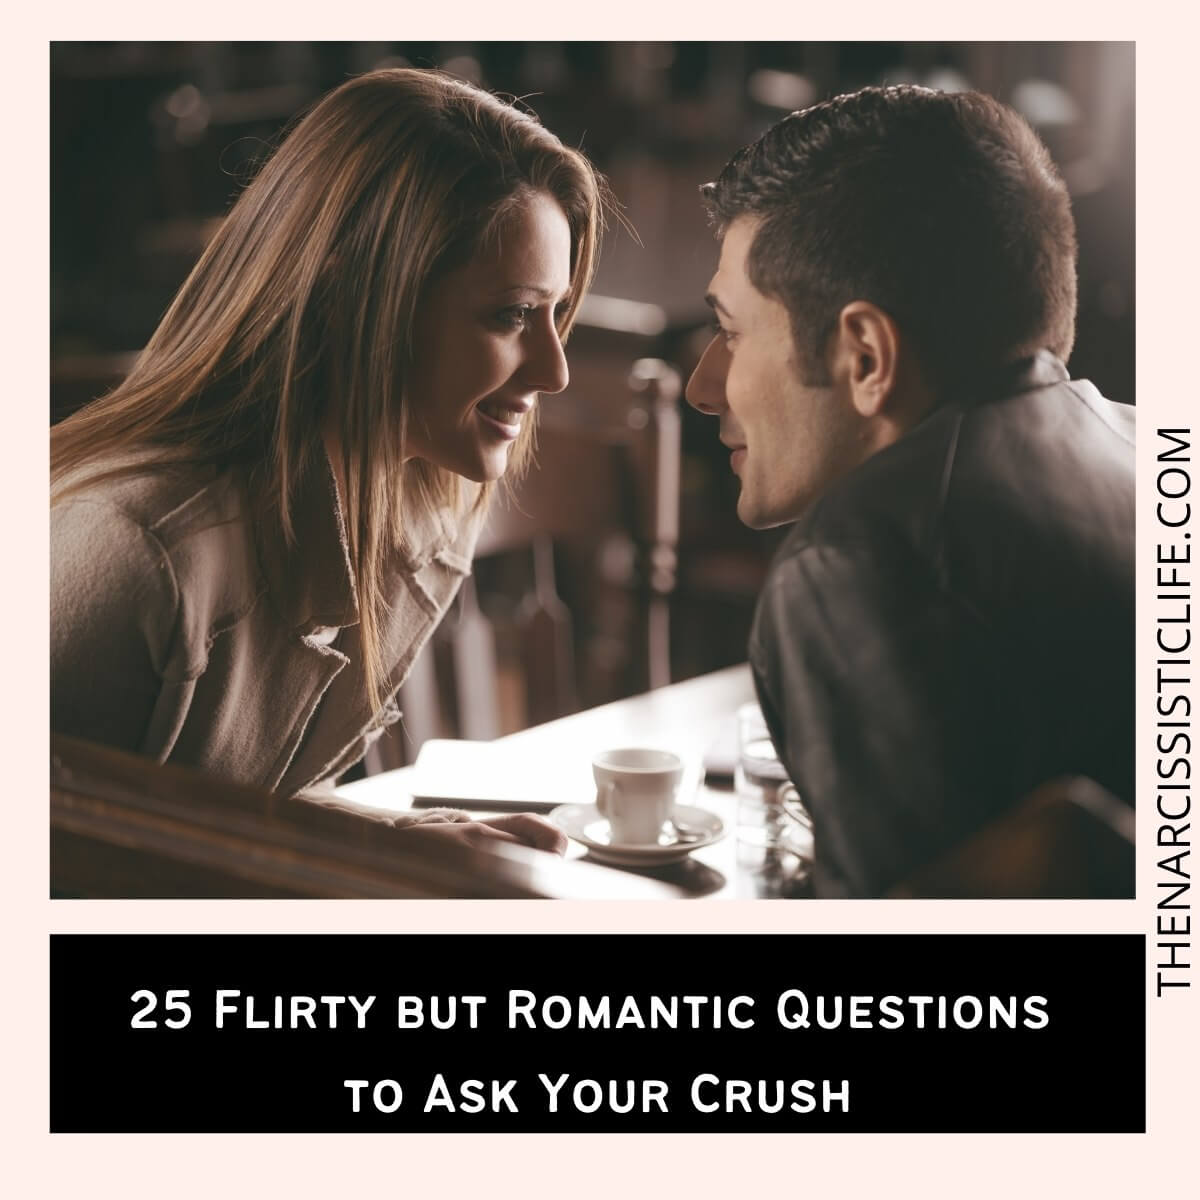 25 Flirty but Romantic Questions to Ask Your Crush.